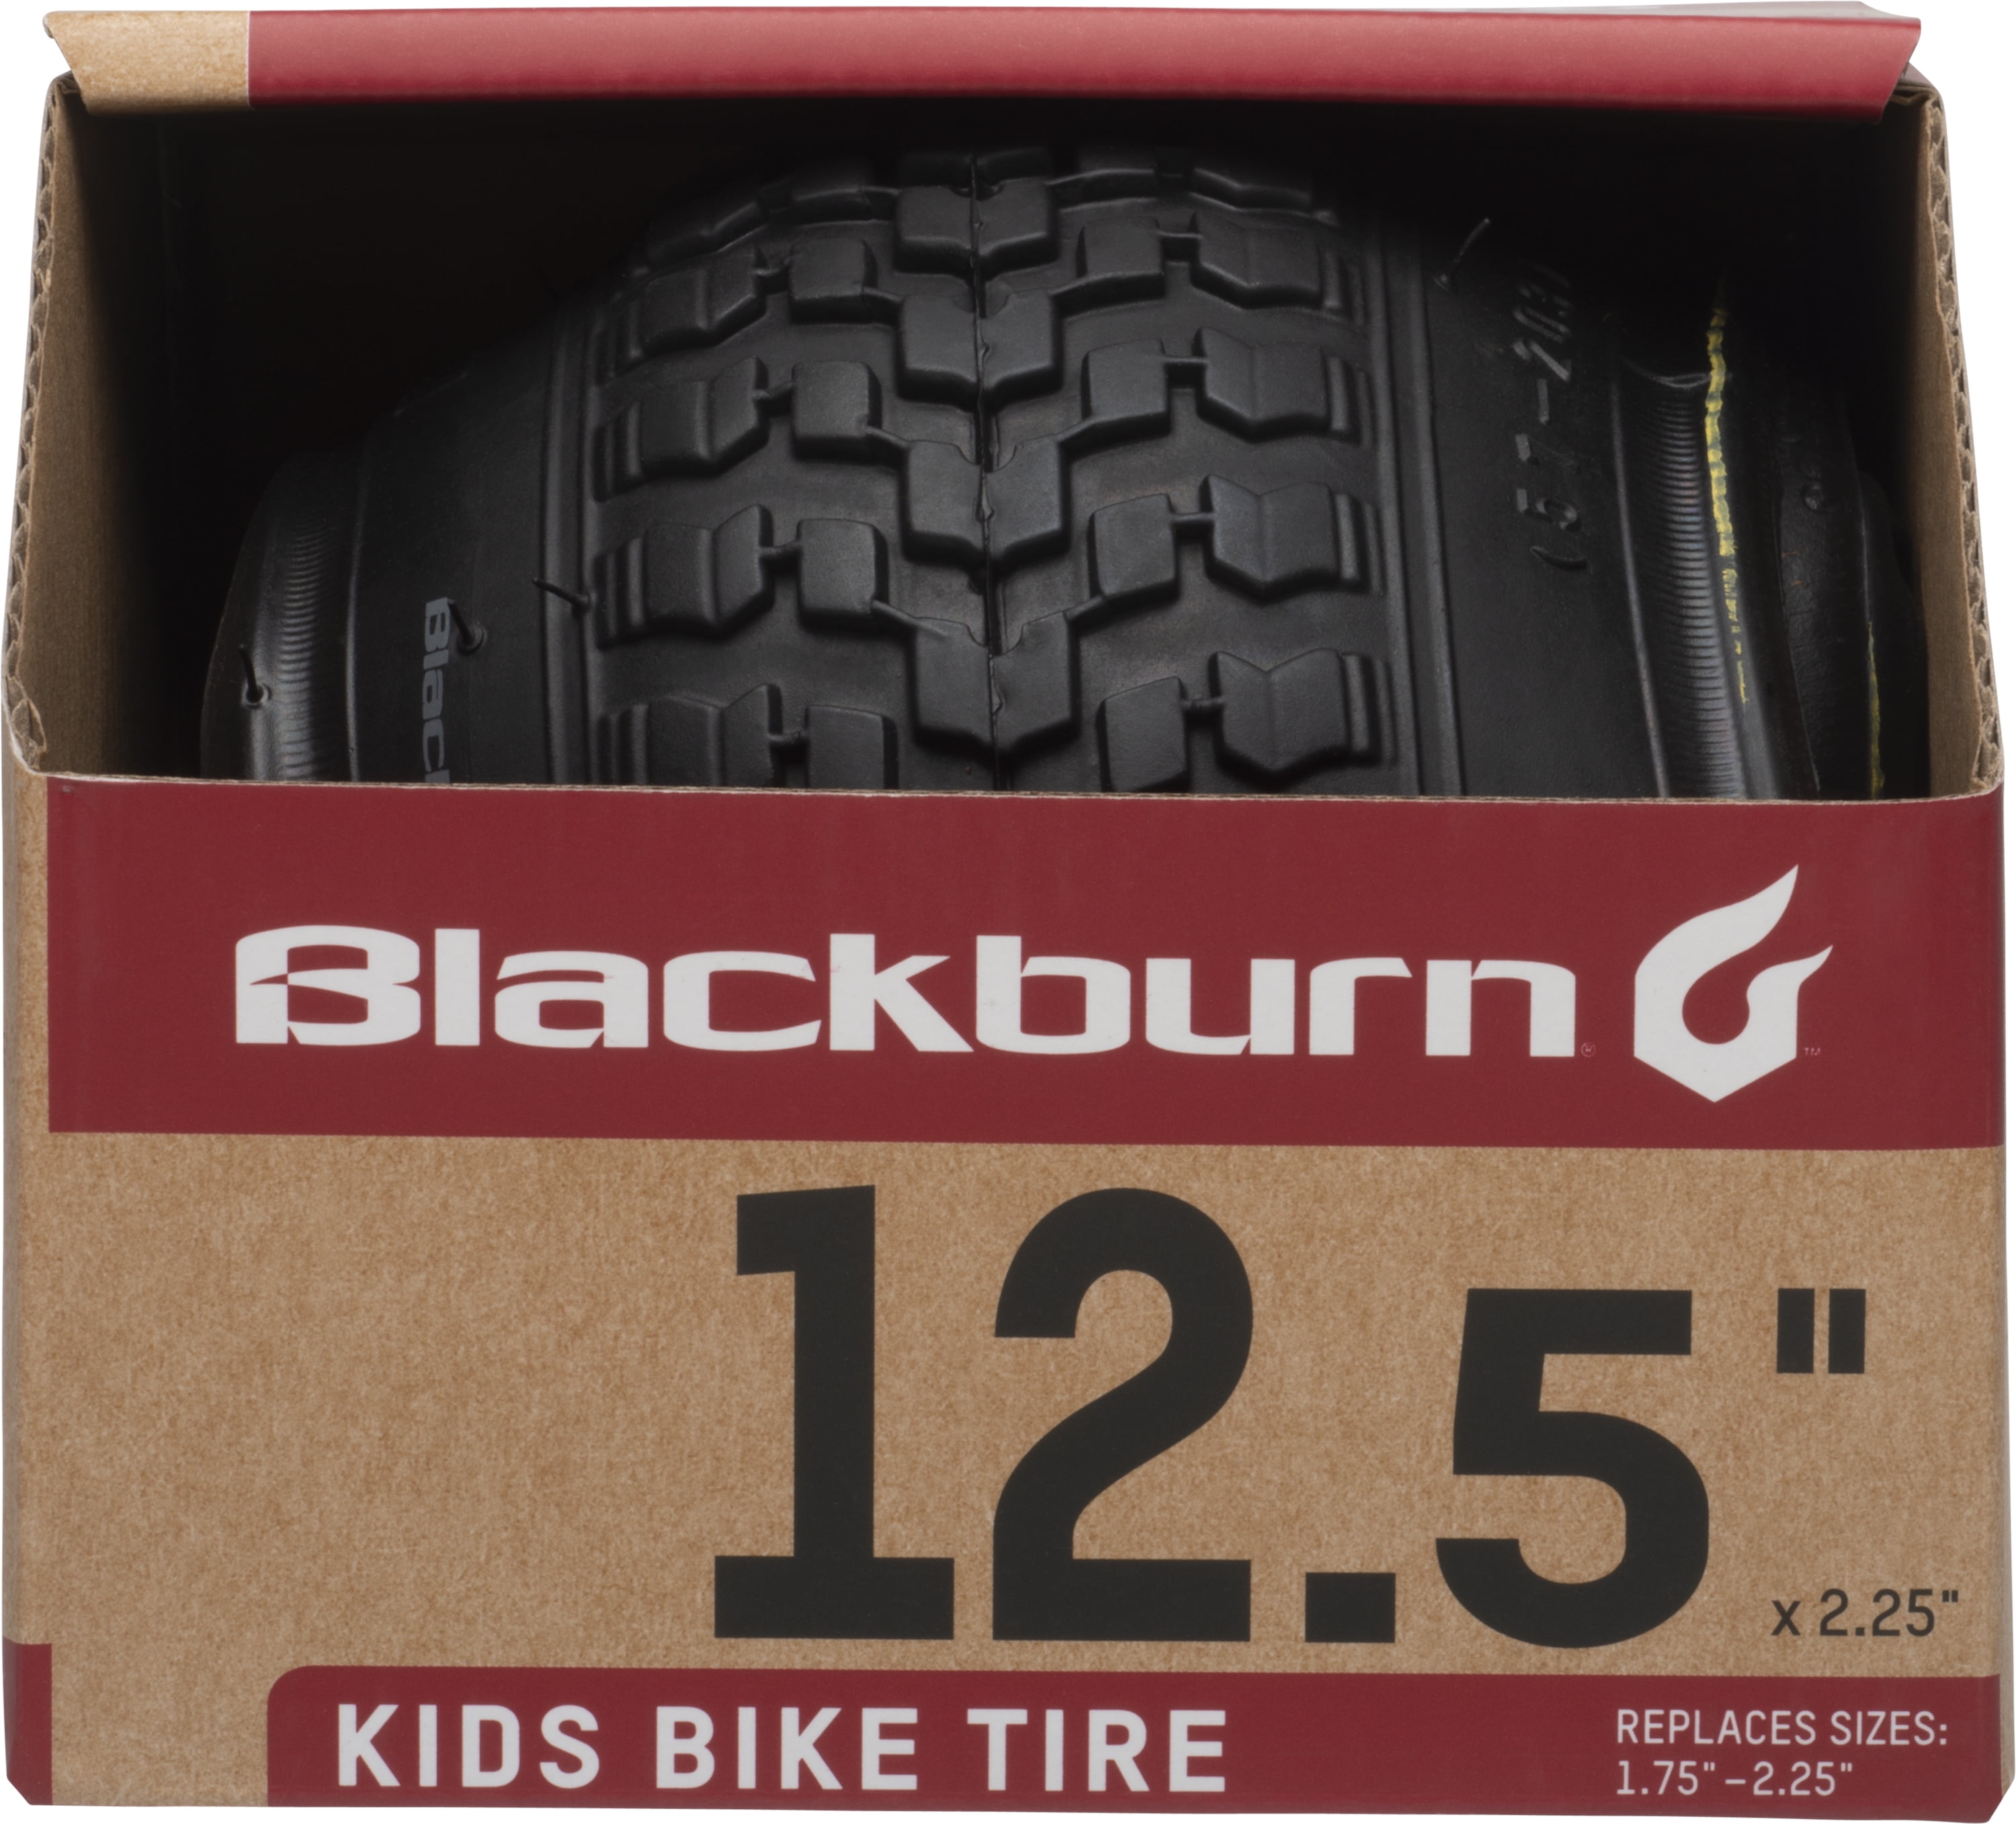 Bell Sports Gate 20 In Rubber Bicycle Tire 1 PK for sale online 